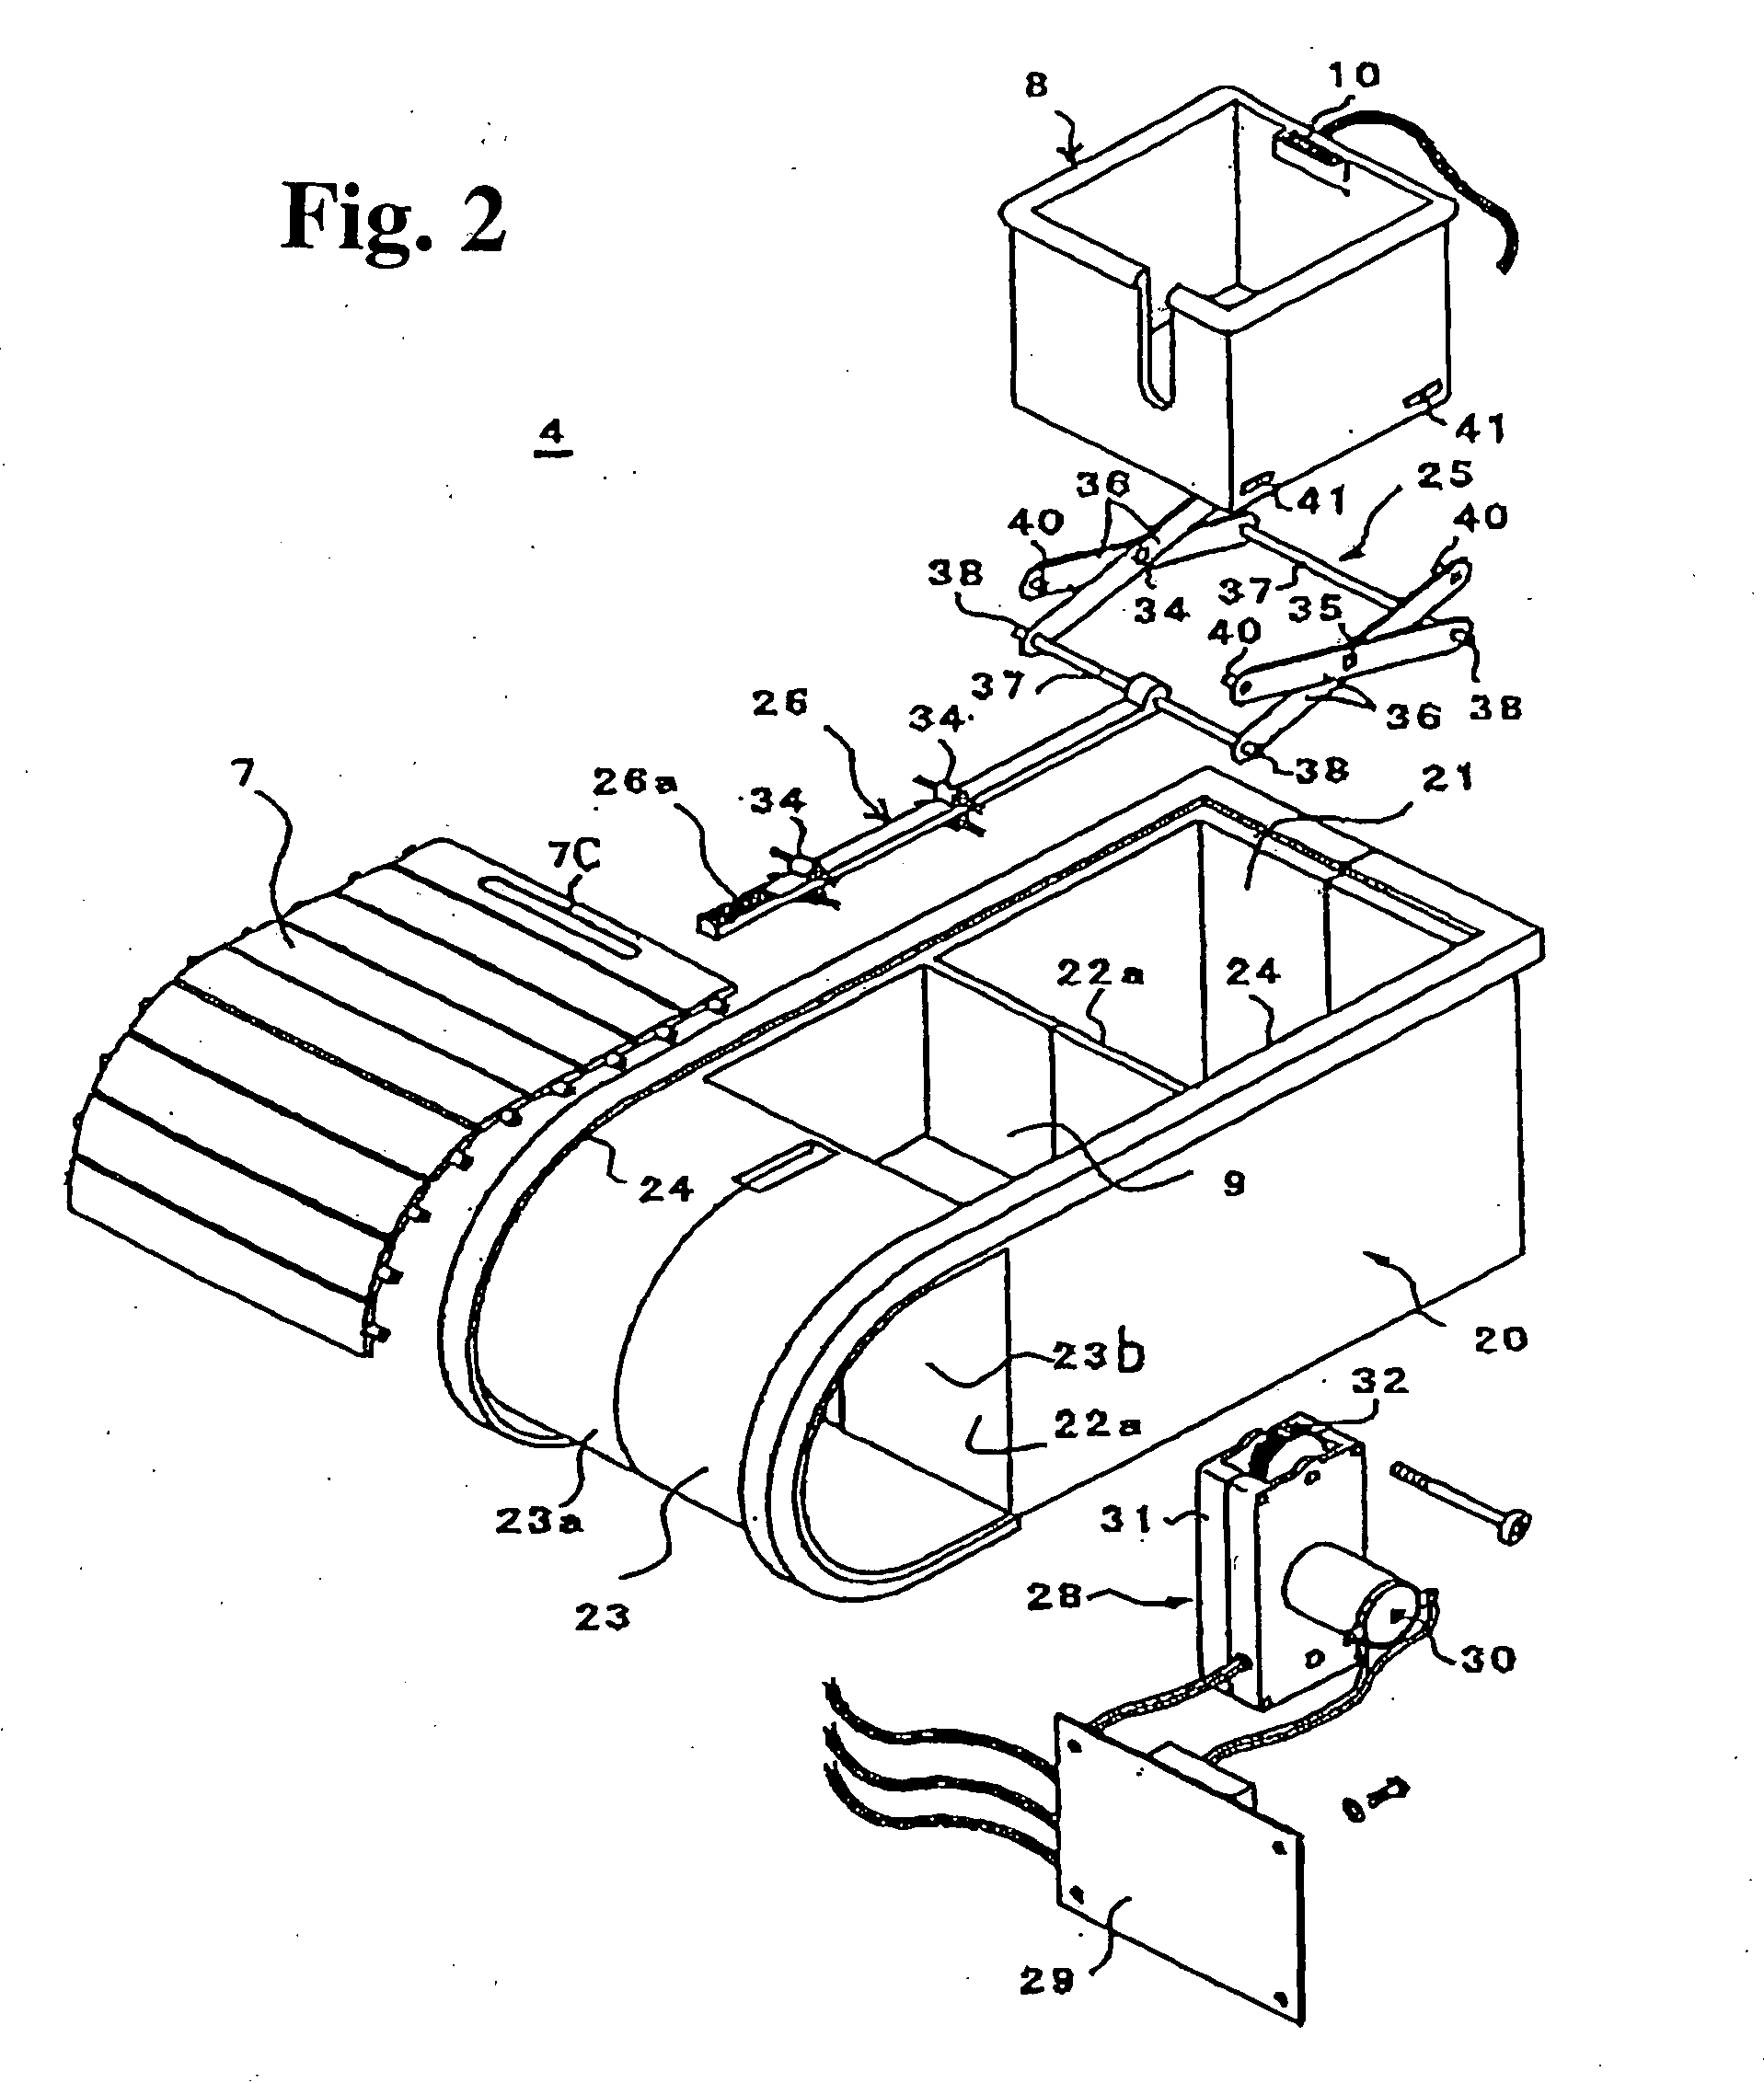 Configuration for Operating Interior Device and Cup Holder Using the Same